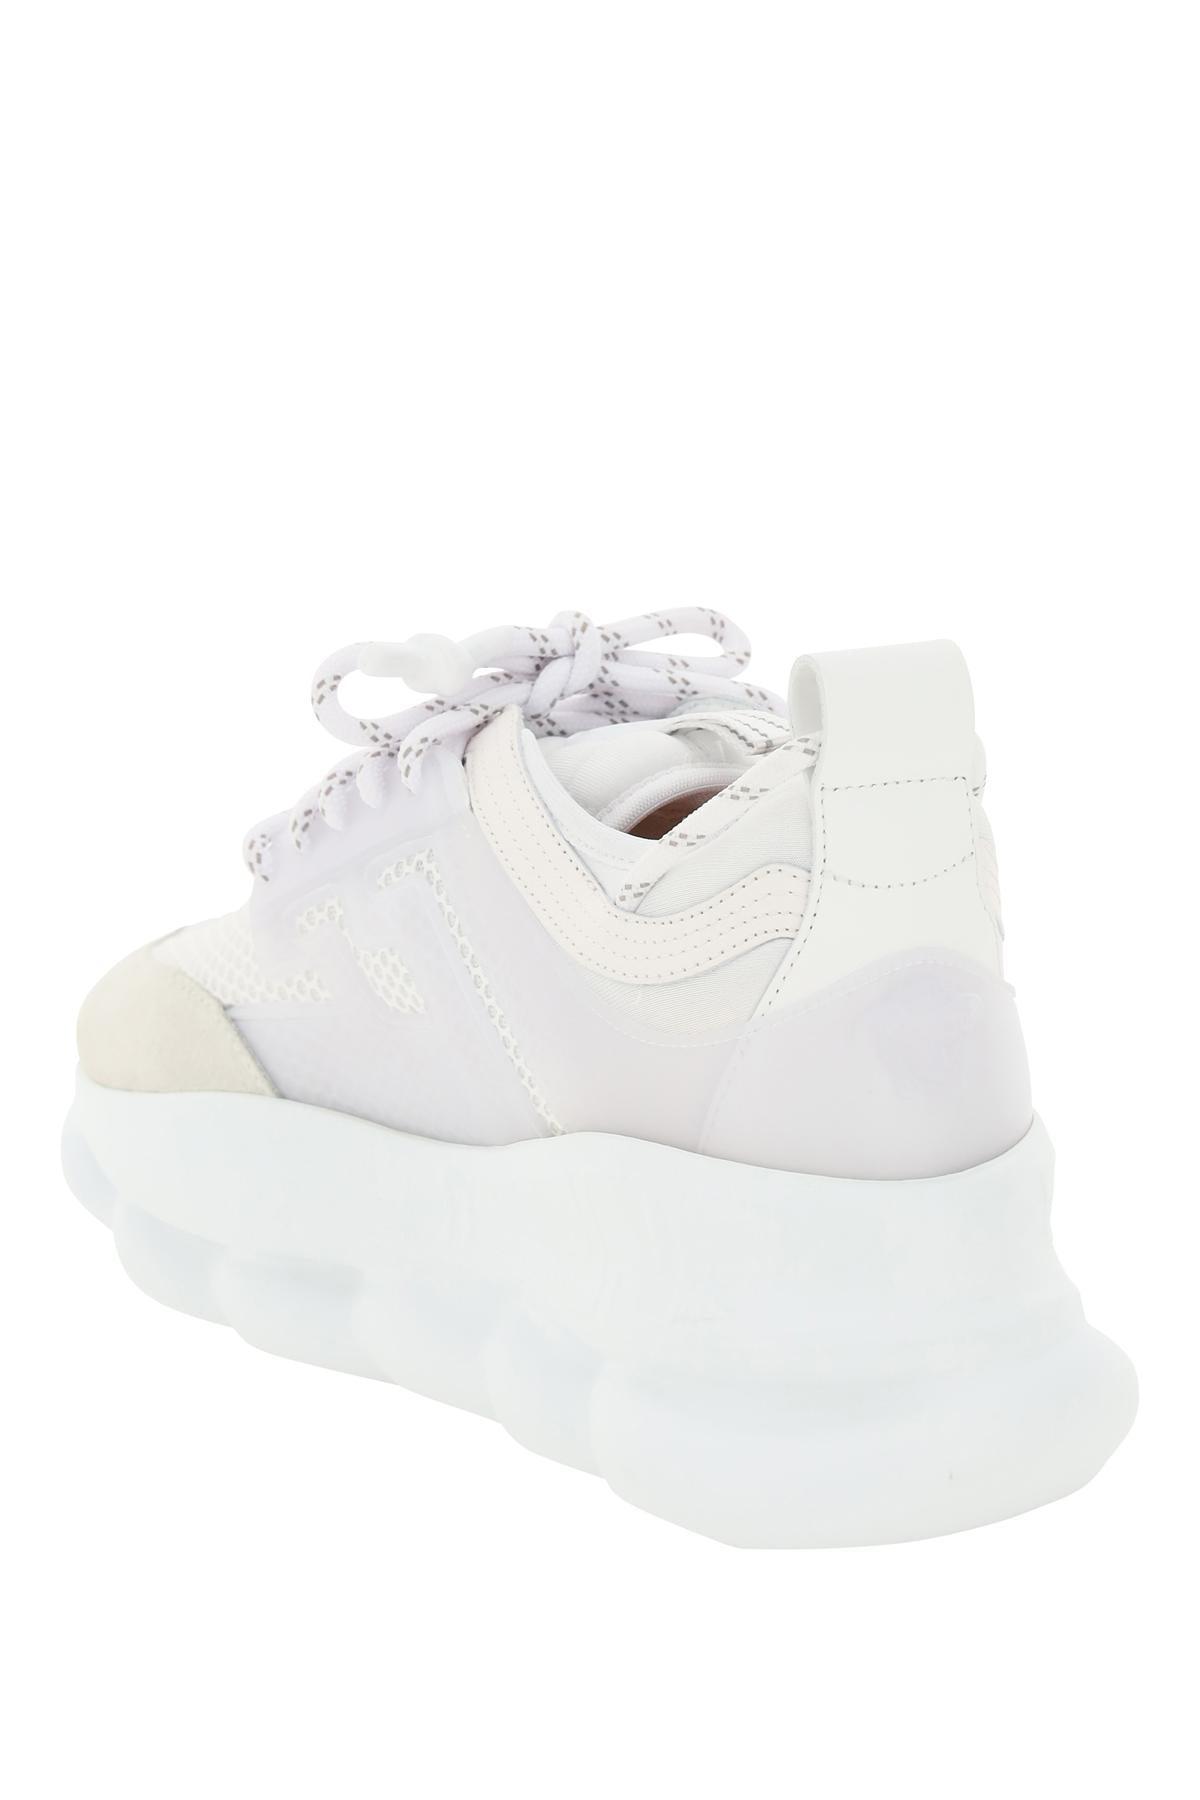 Versace Chain Reaction Sneakers in White for Men | Lyst